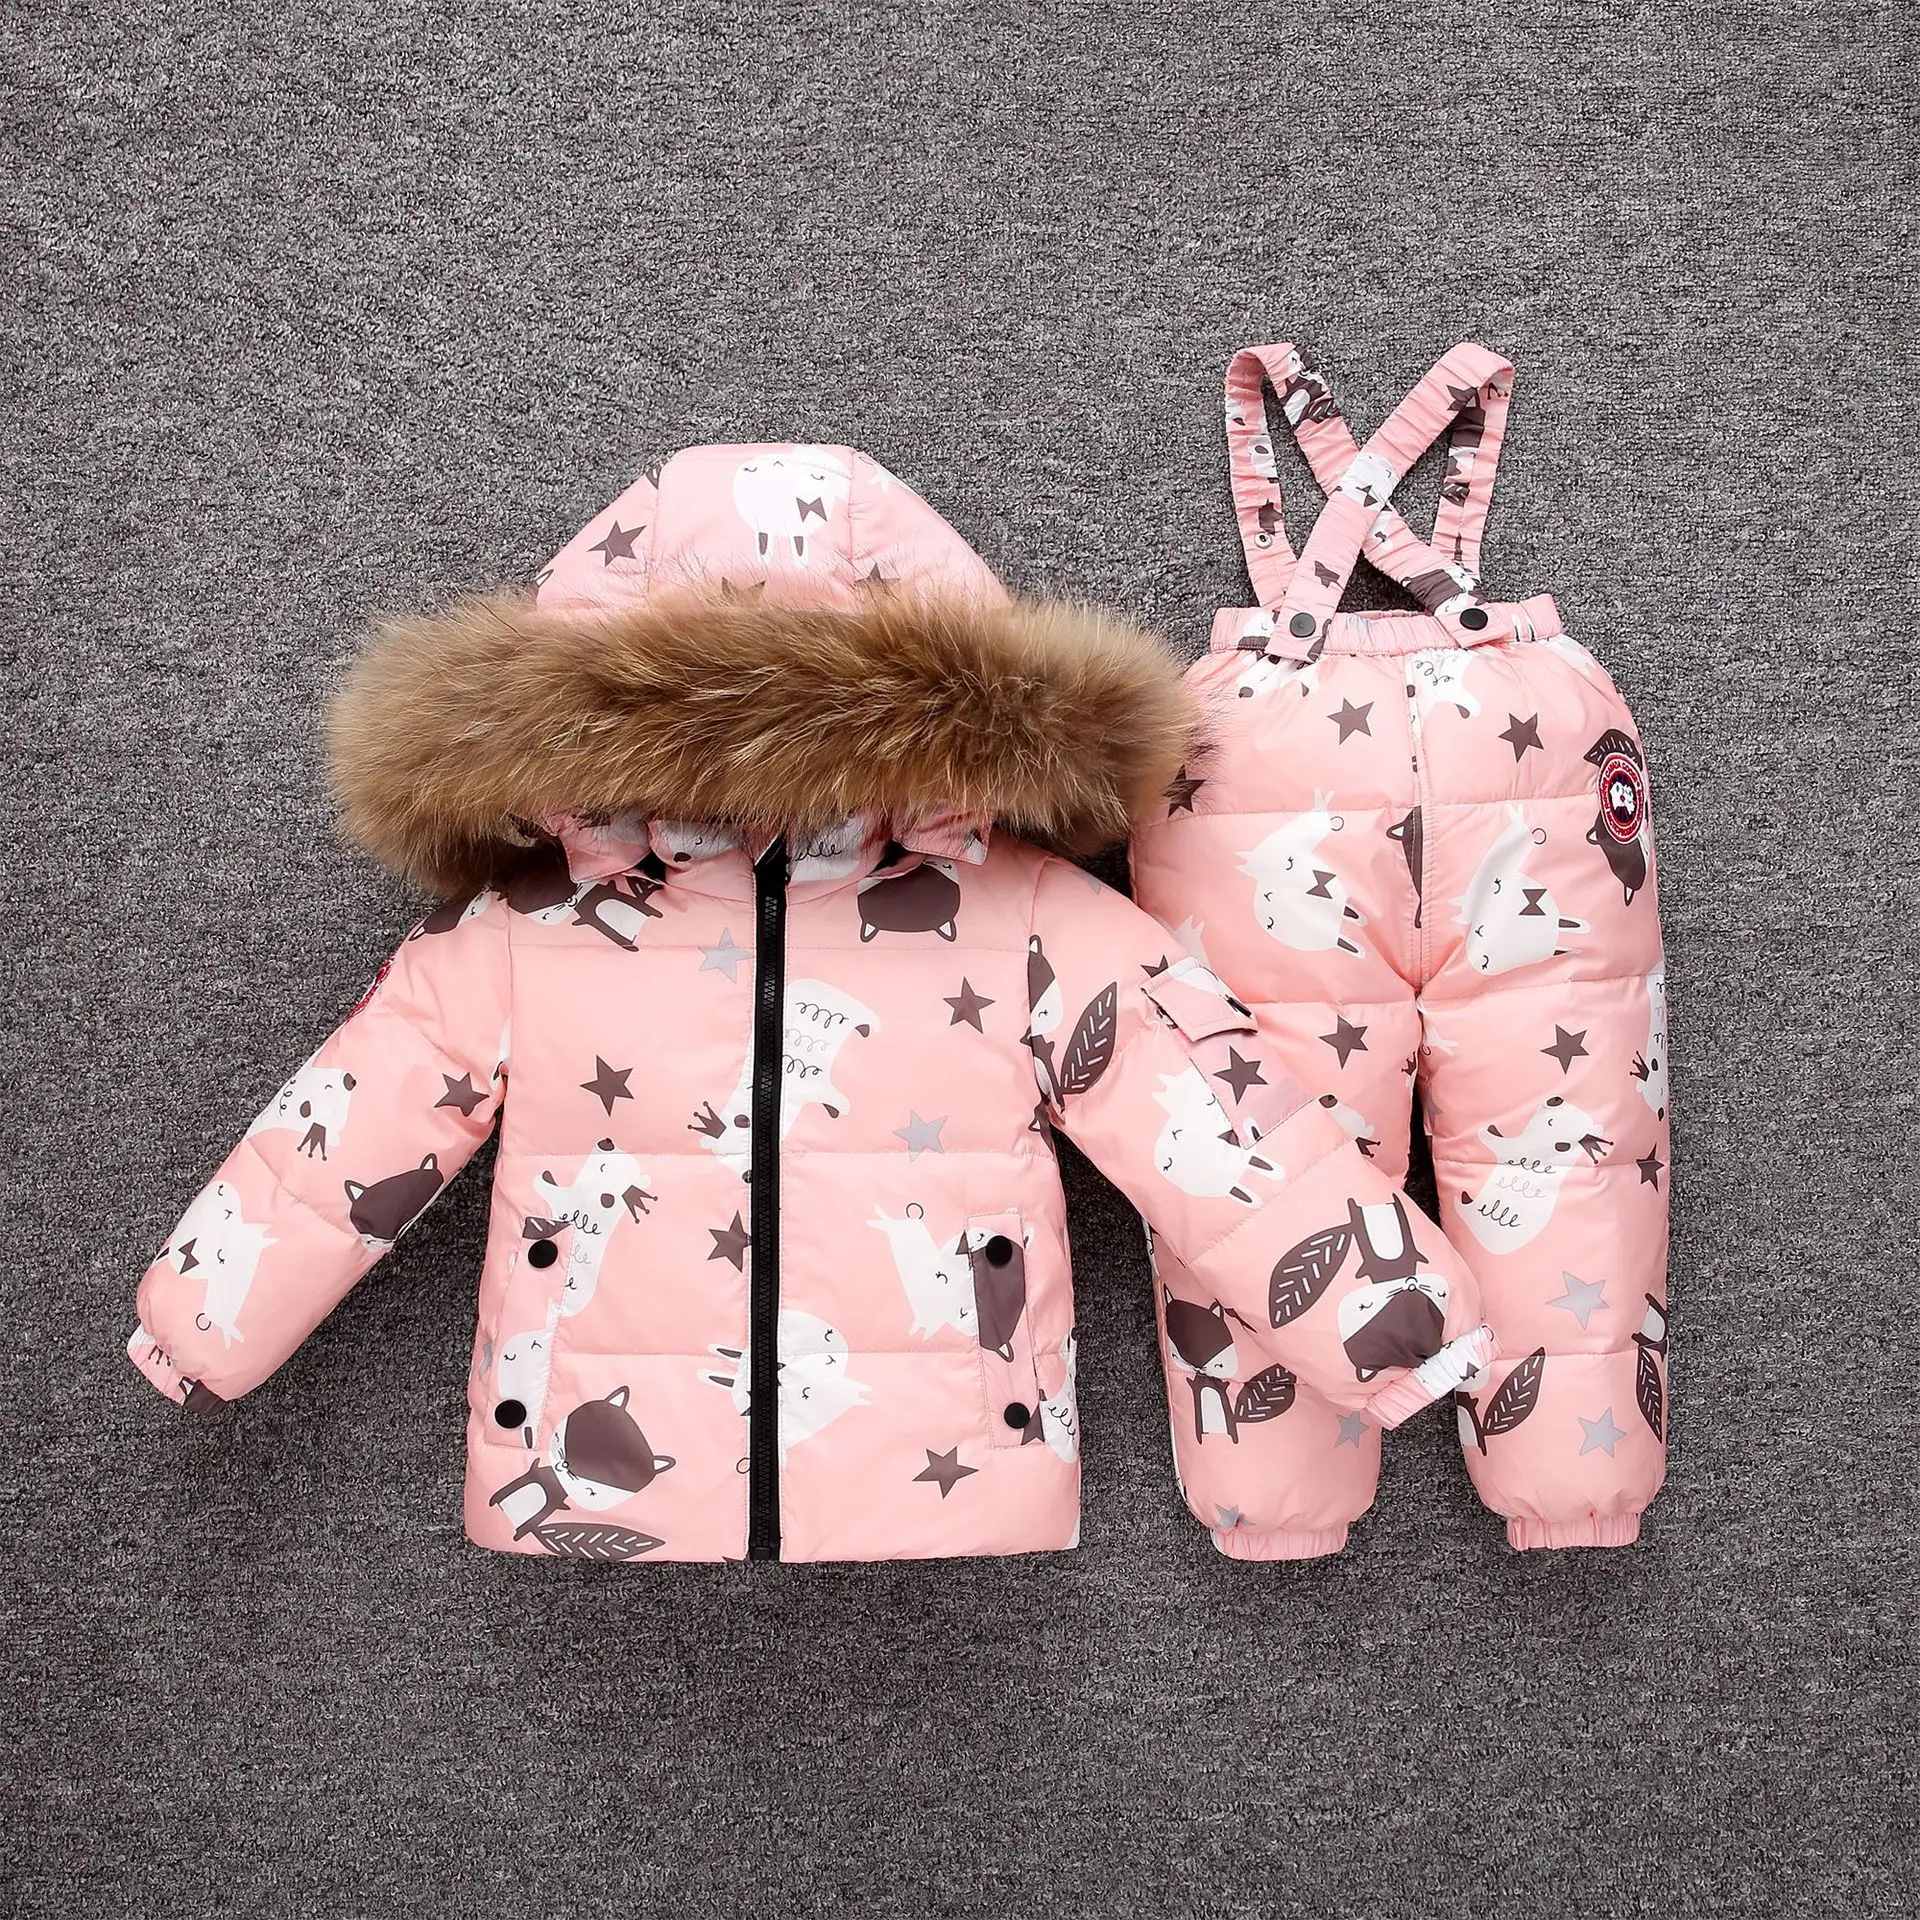 Boy Clothes Baby Girls Clothing Sets Sports Suits White Duck Down Outfit Newborn Christmas Autumn Winter 6-24 Monthes Ski Suit - Цвет: Pink